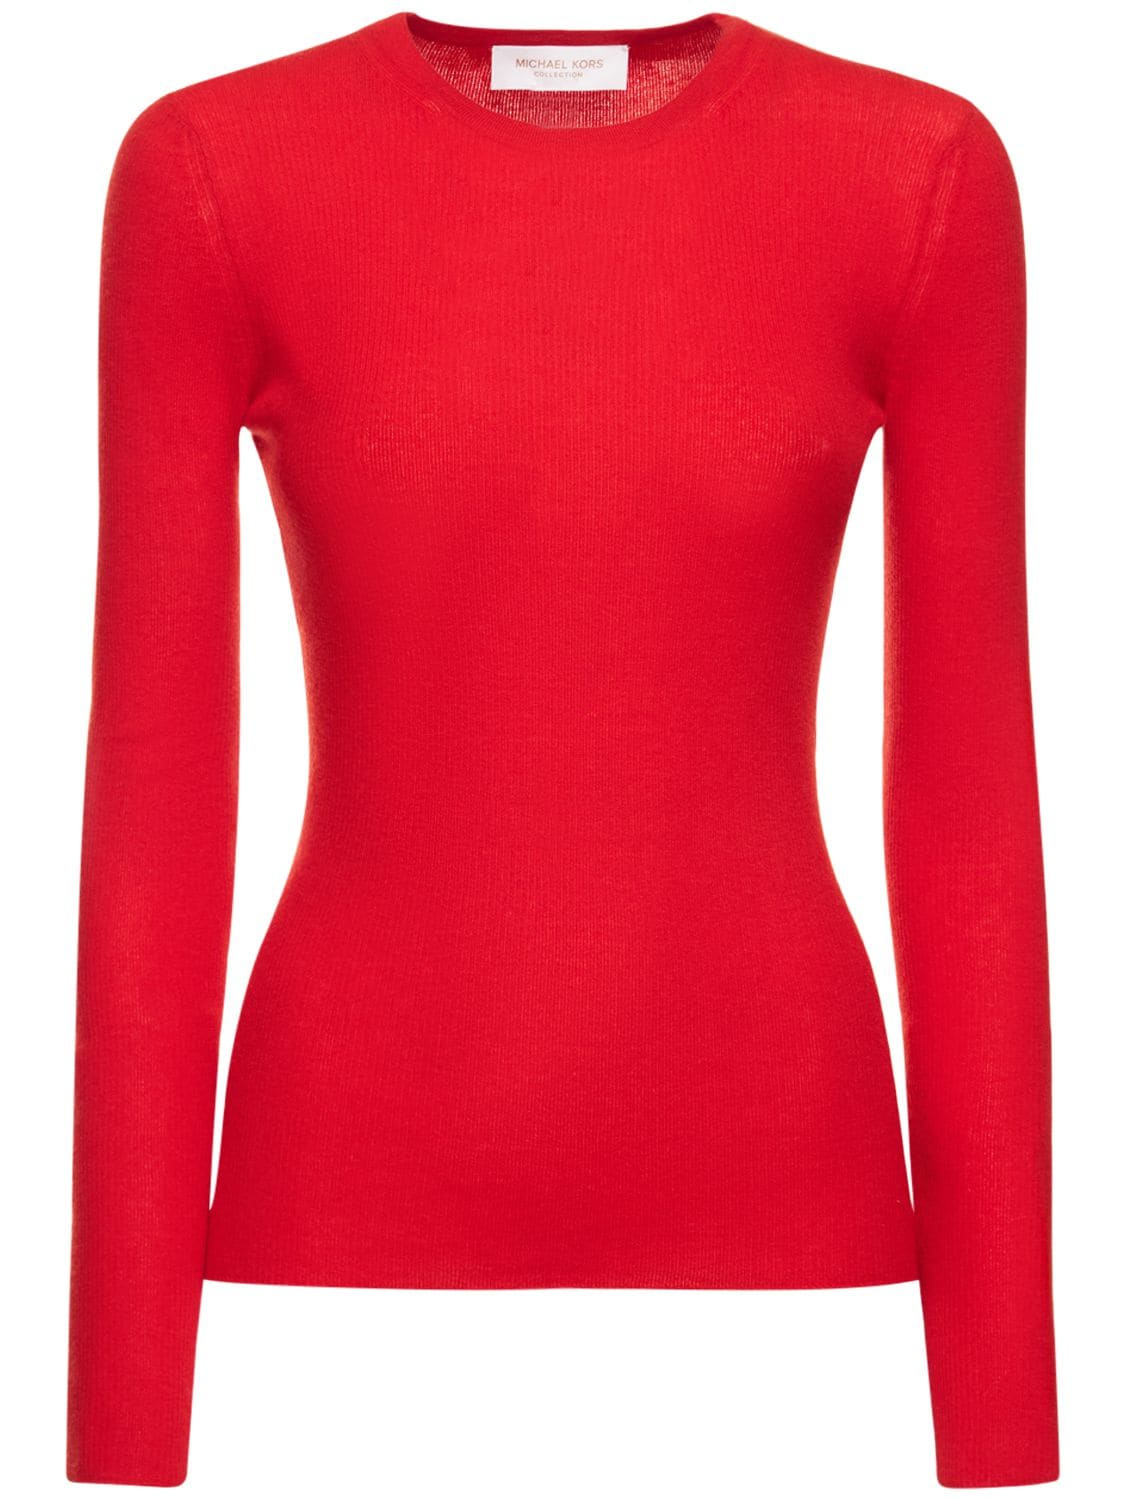 MICHAEL KORS COLLECTION Cashmere Ribbed Knit Crewneck Sweater